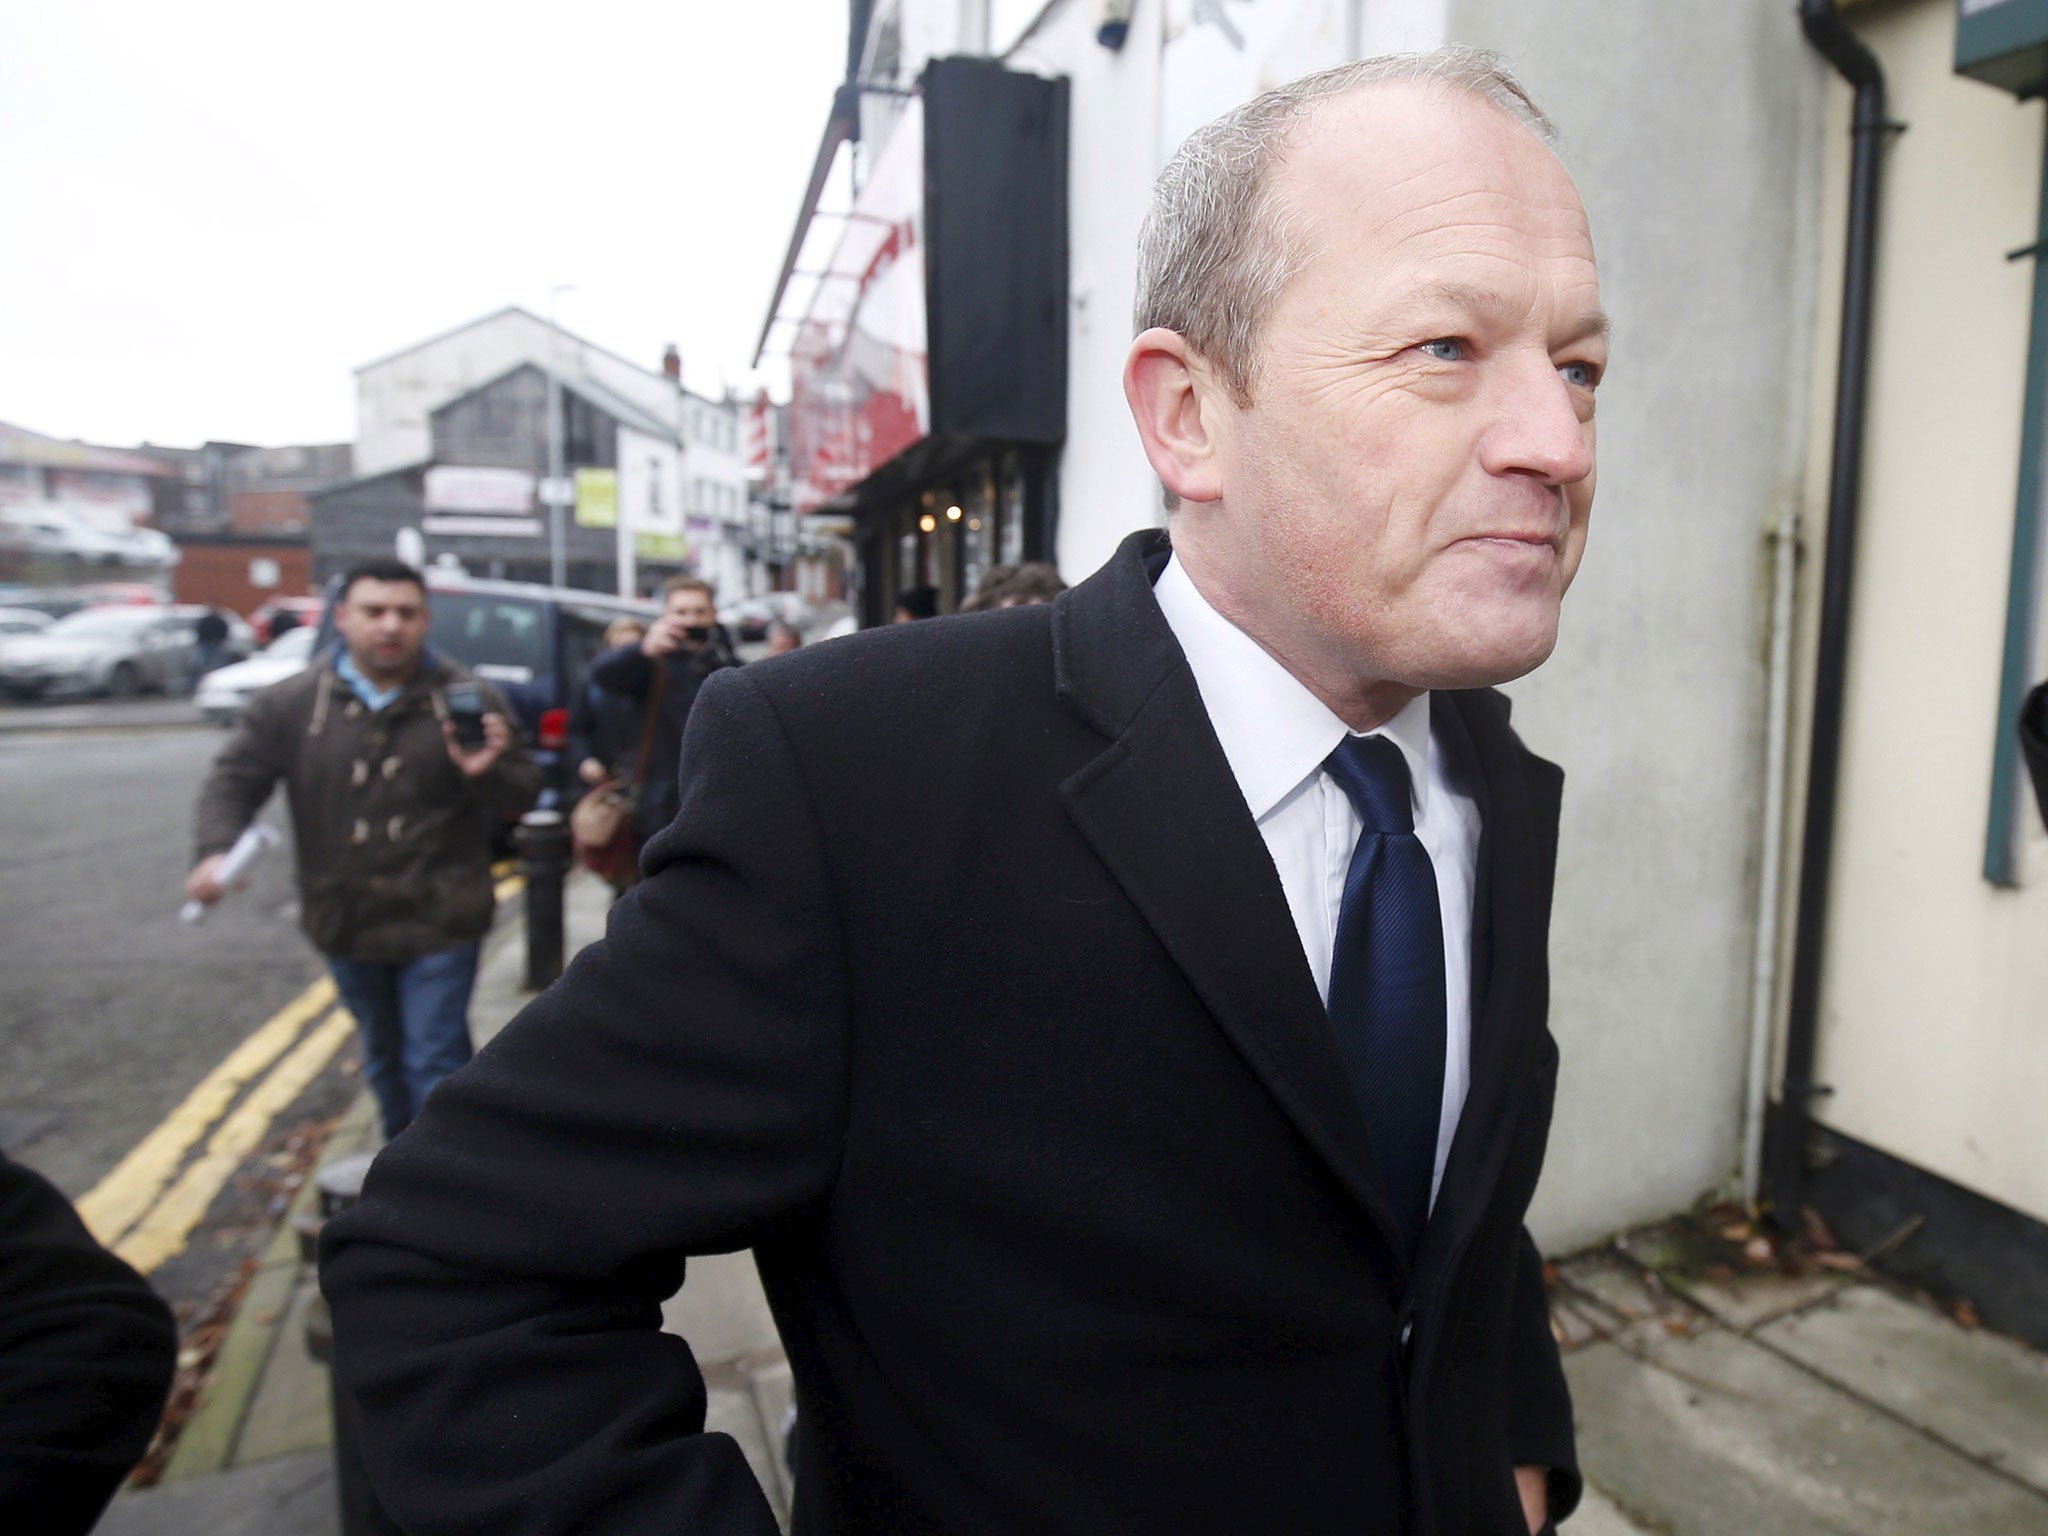 Danczuk was suspended by his party after media allegations about his private life